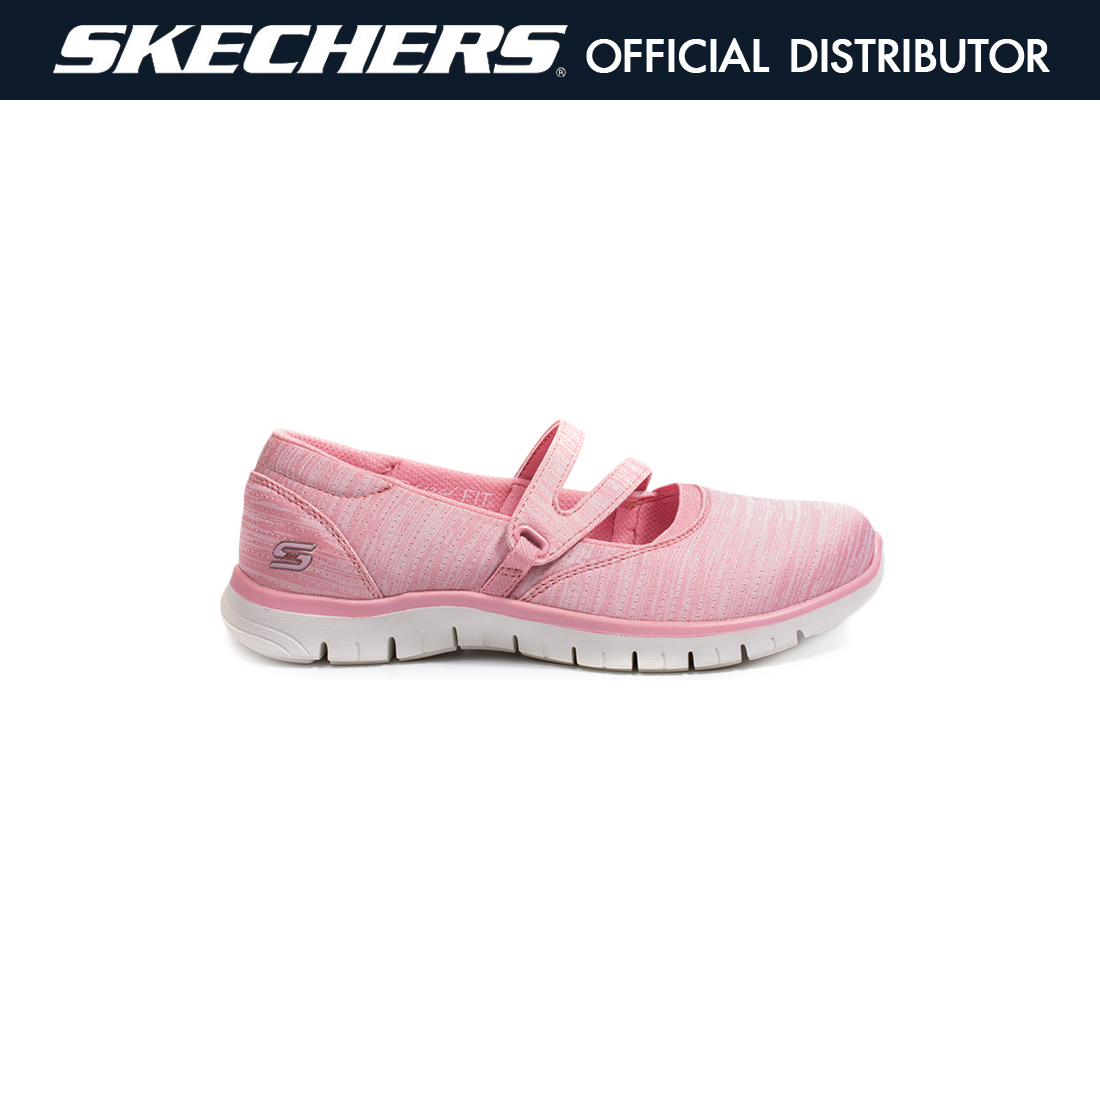 SKECHERS Relaxed Fit: EZ Flex Renew - Make It Count รองเท้าลำลองผู้หญิง